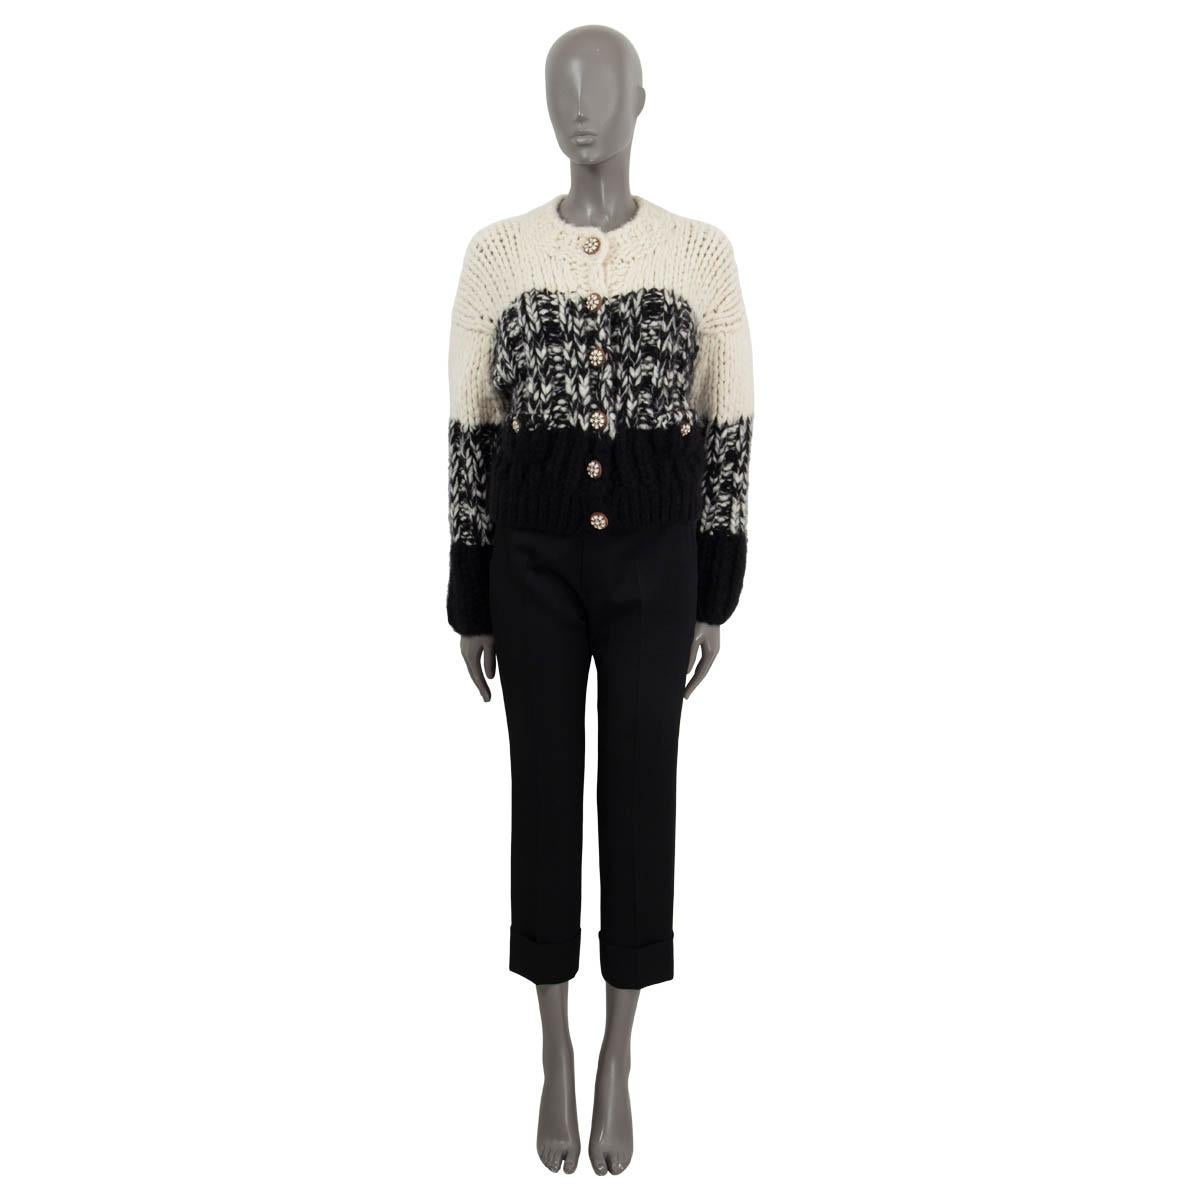 100% authentic Chanel Fall/Winter 2019 chunky knit cardigan in black and white cashmere (90%) and silk (10%). Features two buttoned pockets on the front and long sleeves. Opens with six buttons on the front. Unlined. Has been worn and is in